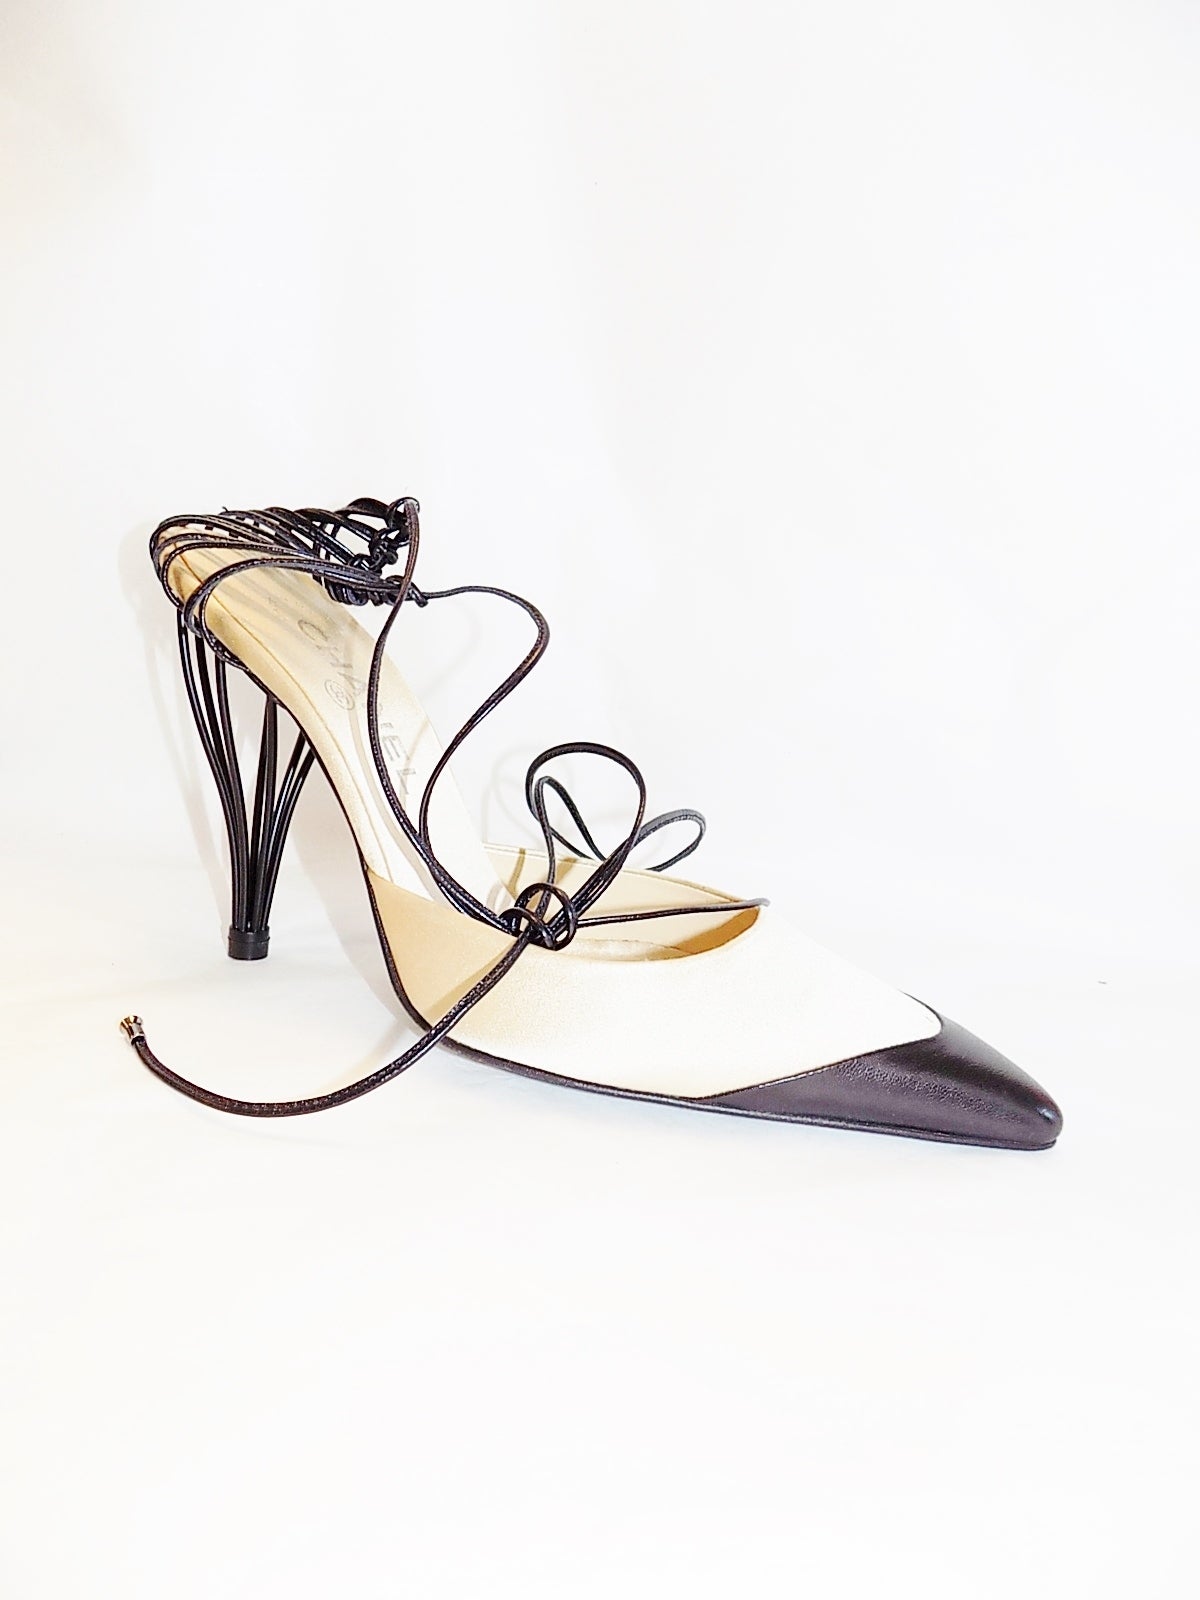 Chanel Wire Heel Shoes NEW  Sz 39.5 3